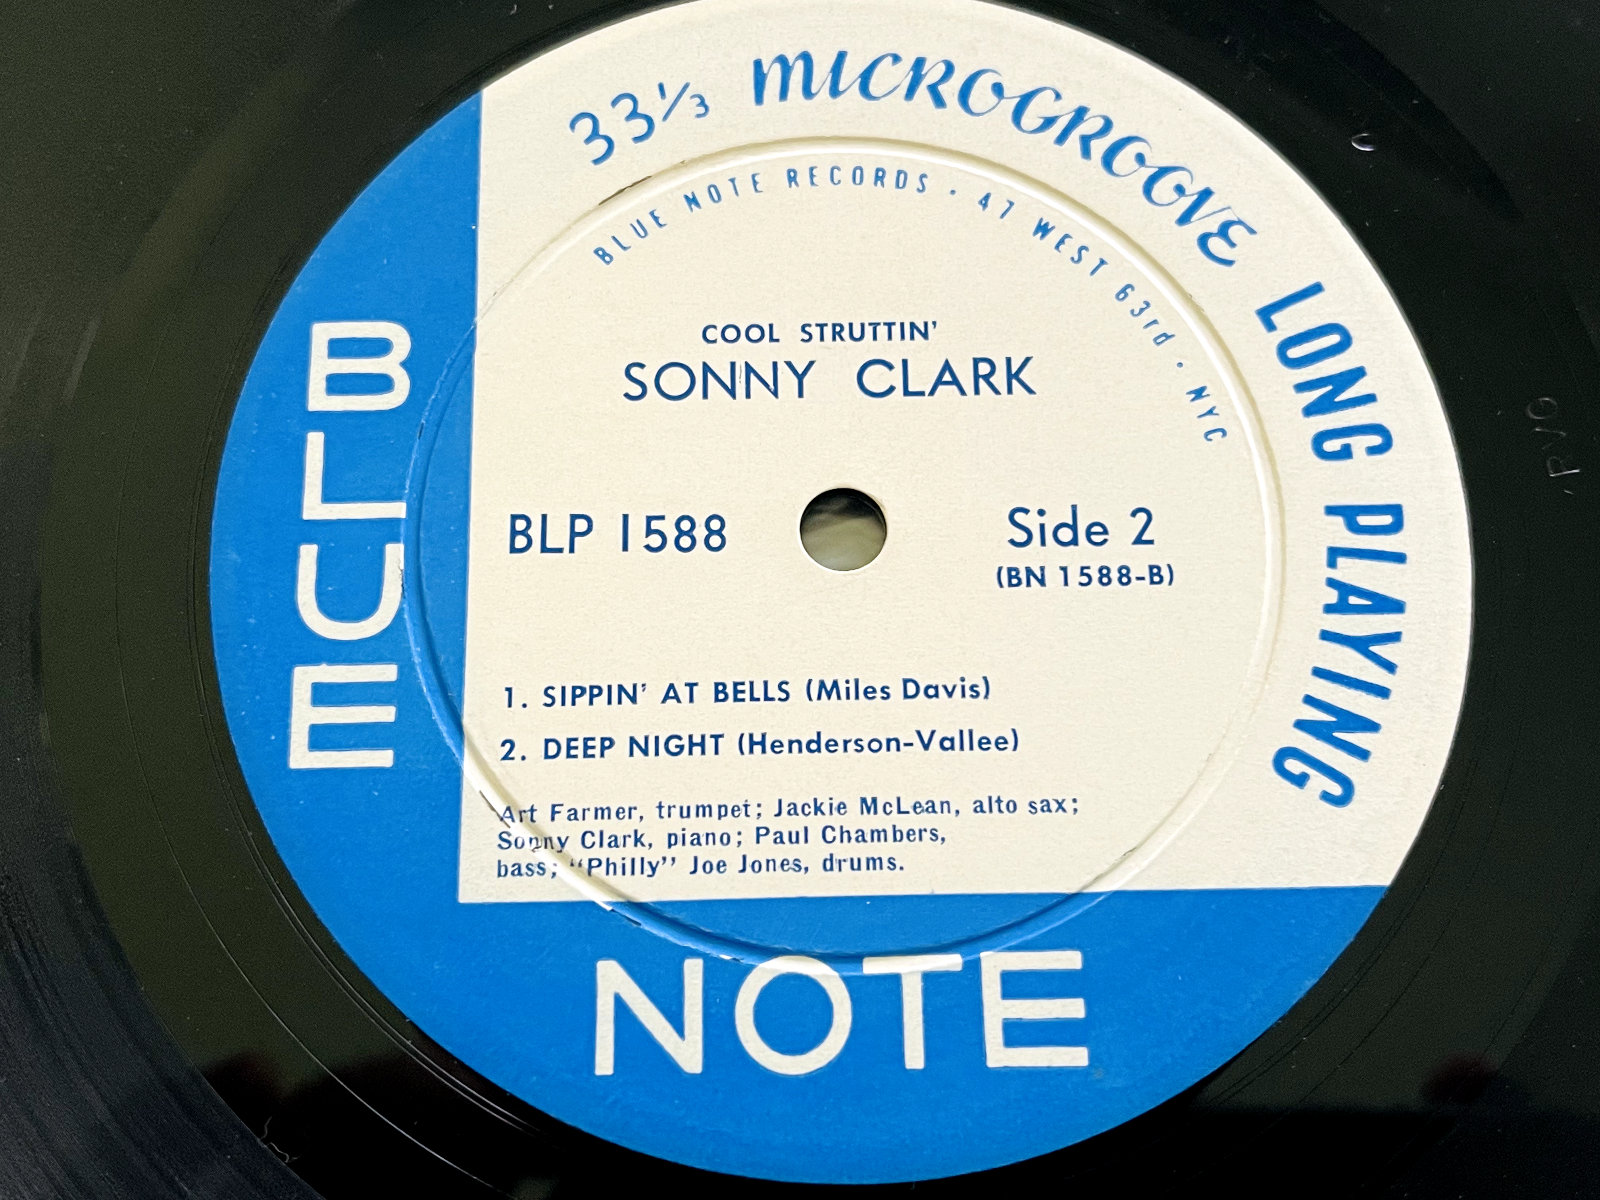 Pic 3 SONNY CLARK - COOL STRUTTIN - BLUE NOTE - FIRST MONO EDITION EAR -LITTLE PLAYED